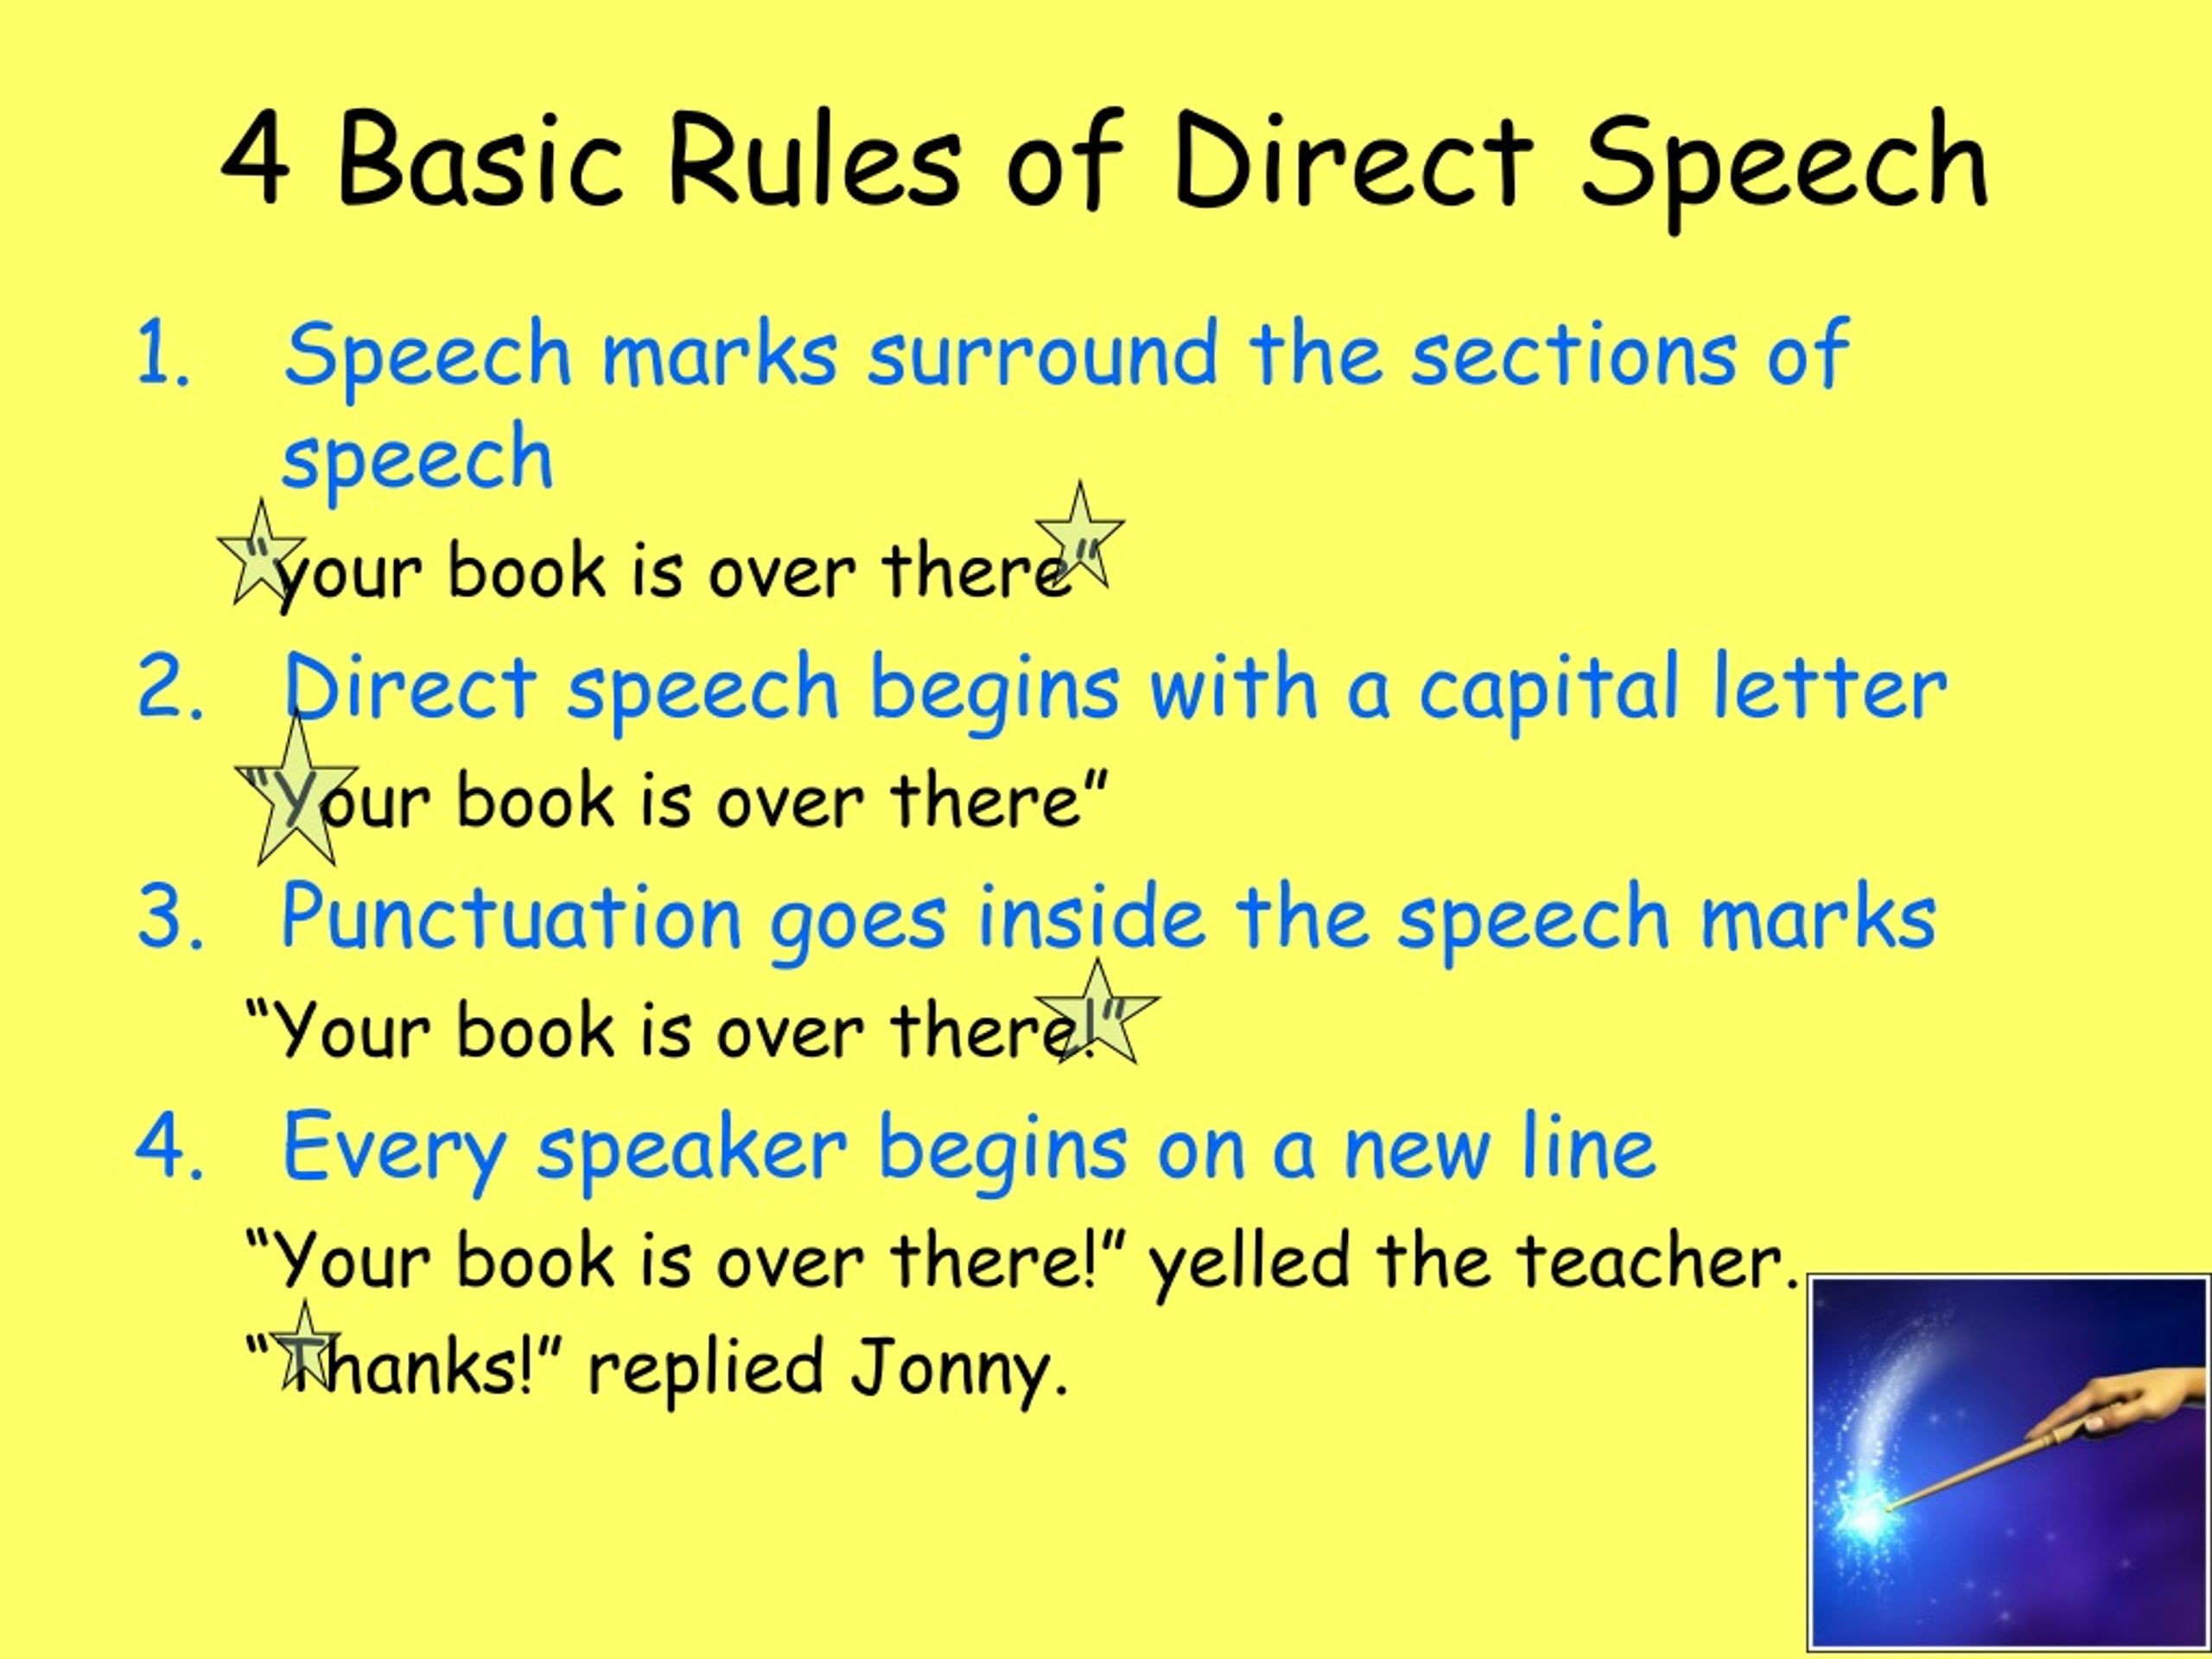 write the famous lines in direct speech